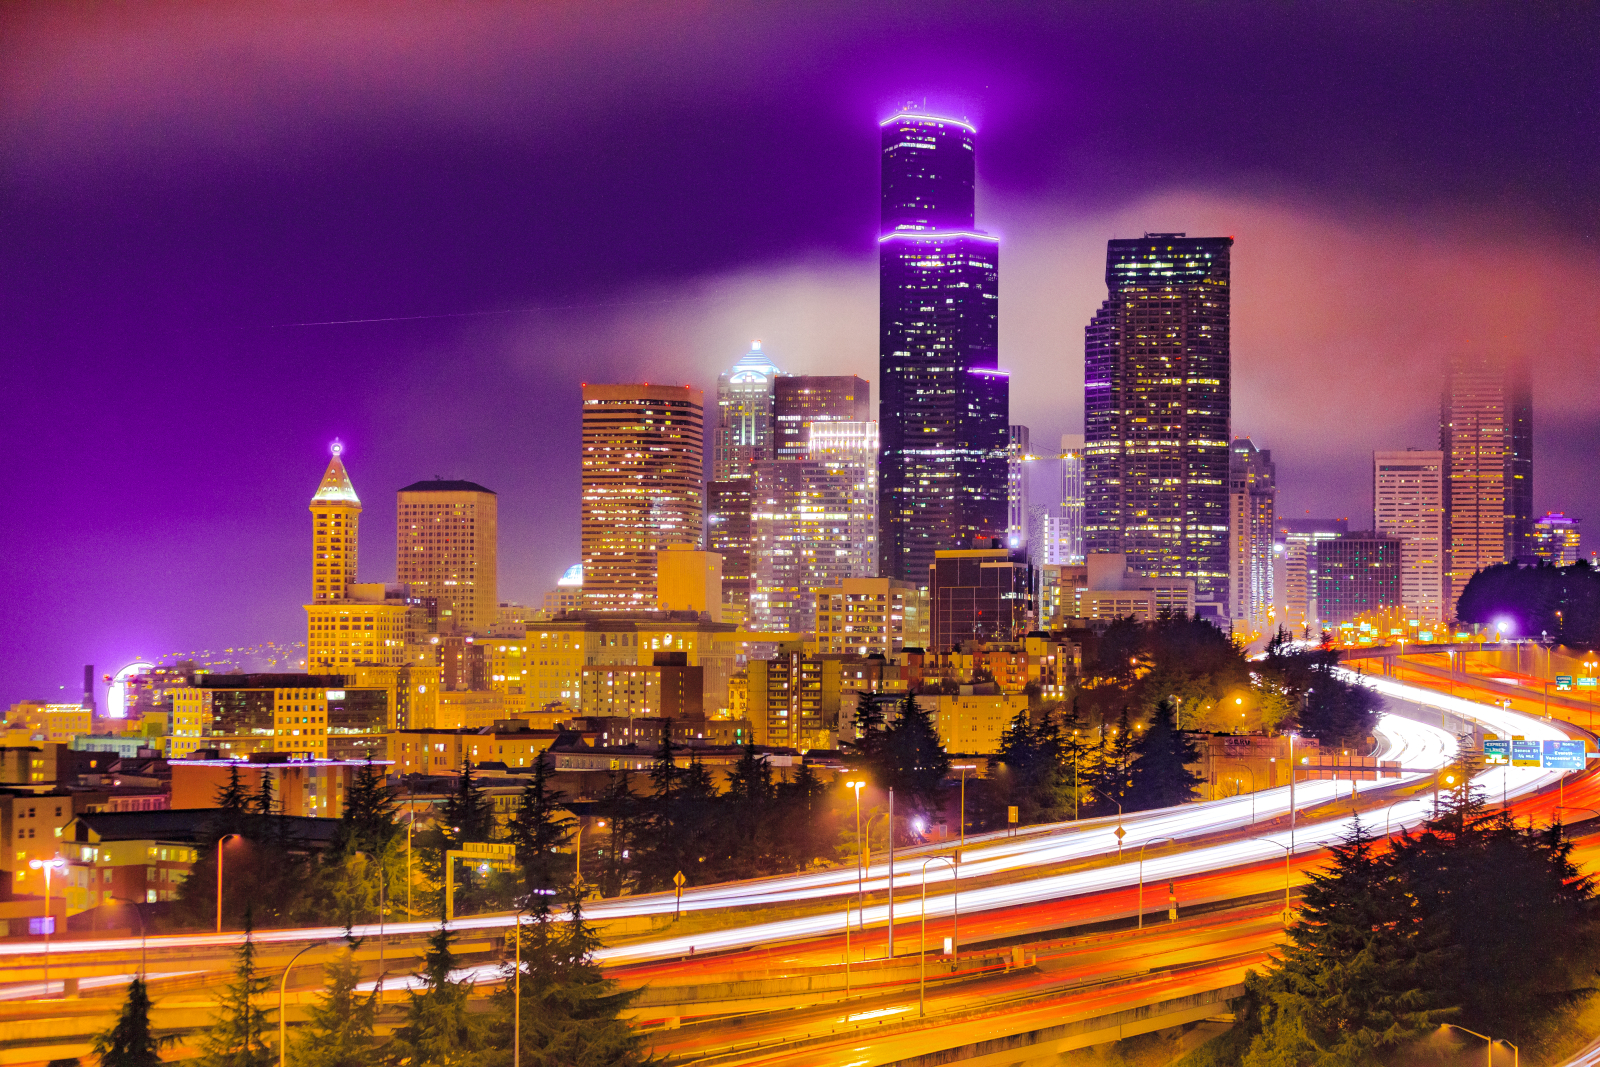 Seattle city scape at night with I-5 in the foreground. A purple sky is behind the buildings.